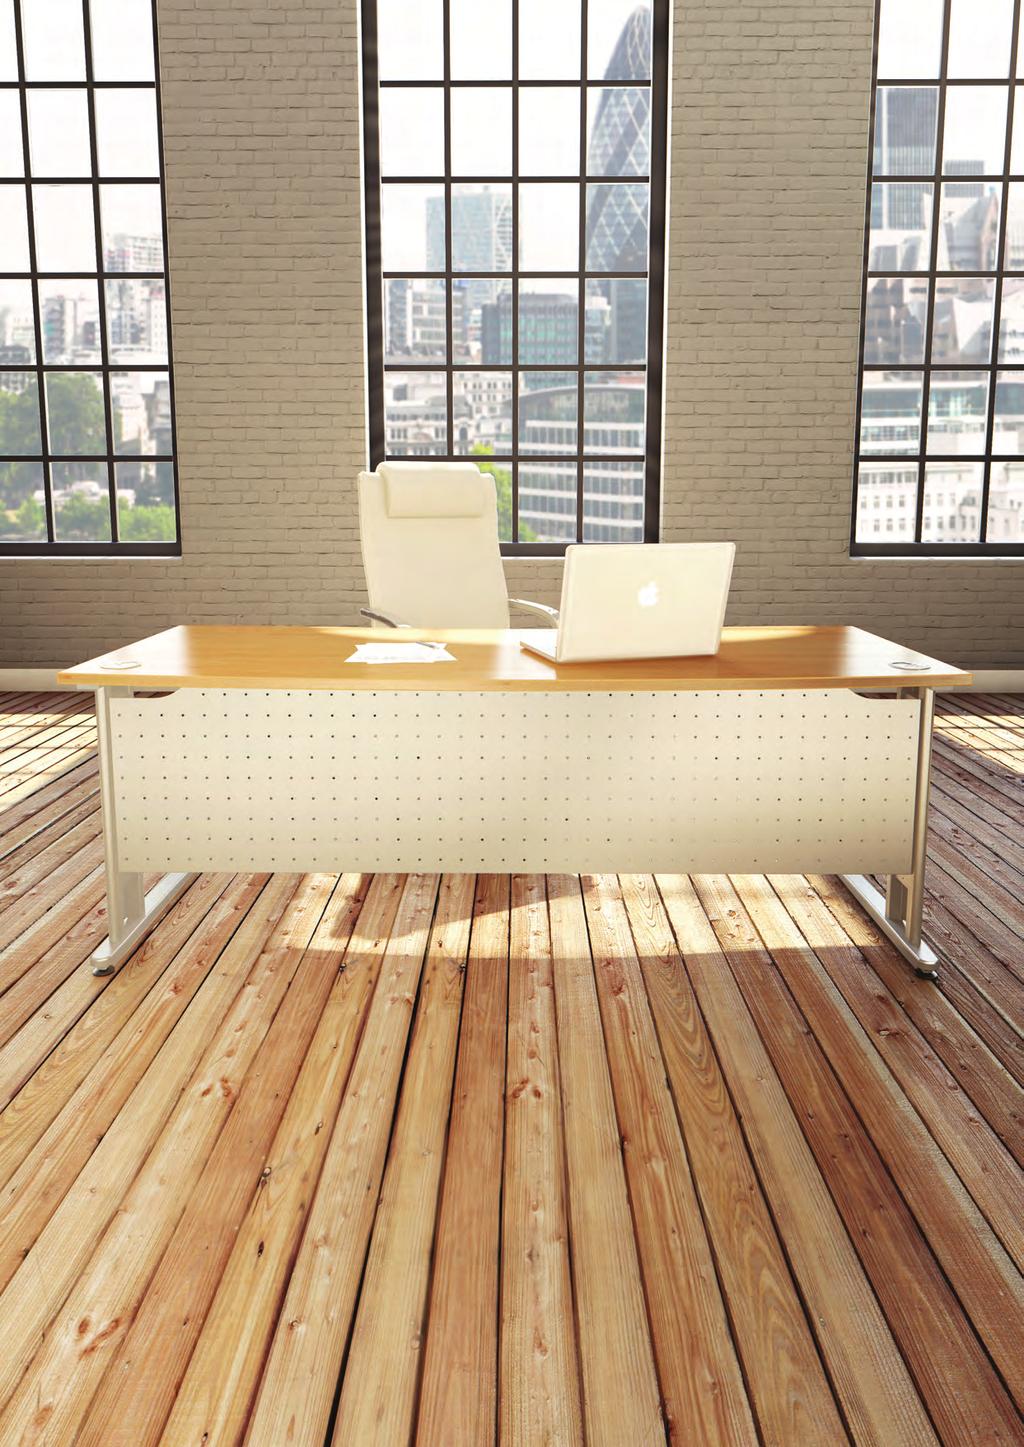 Atmosphere Atmosphere An executive range of office furniture